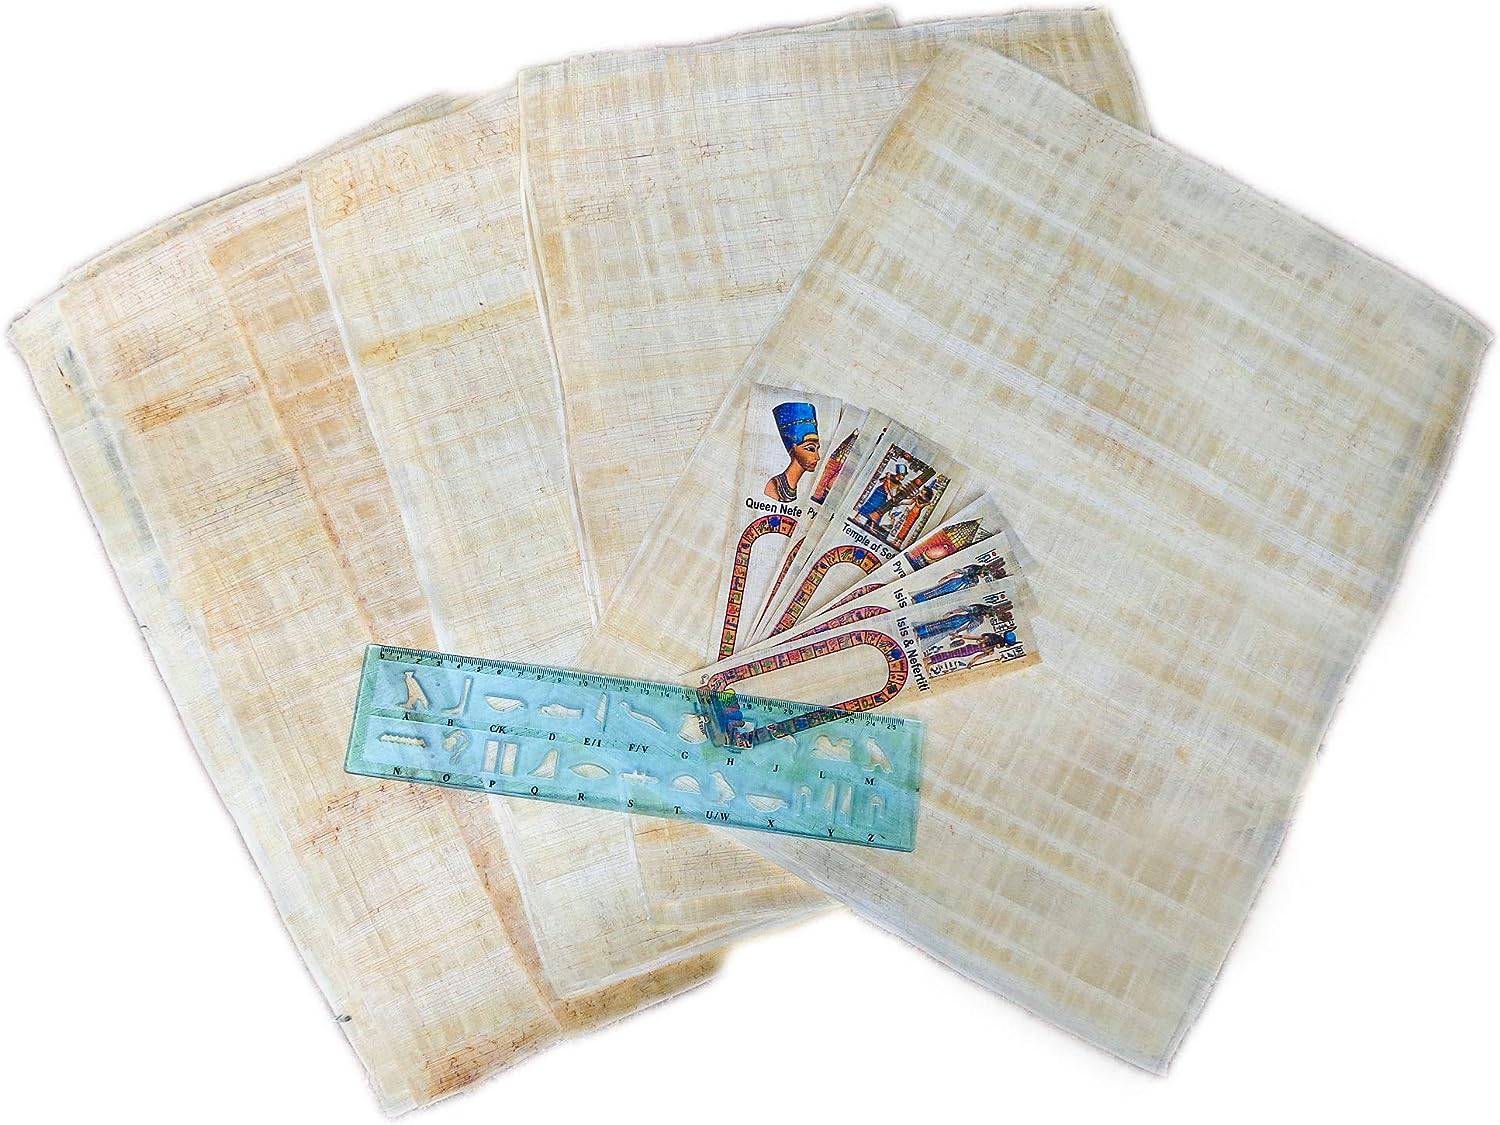 10 Egyptian Papyrus blank paper Handmade Sheets for Art Project